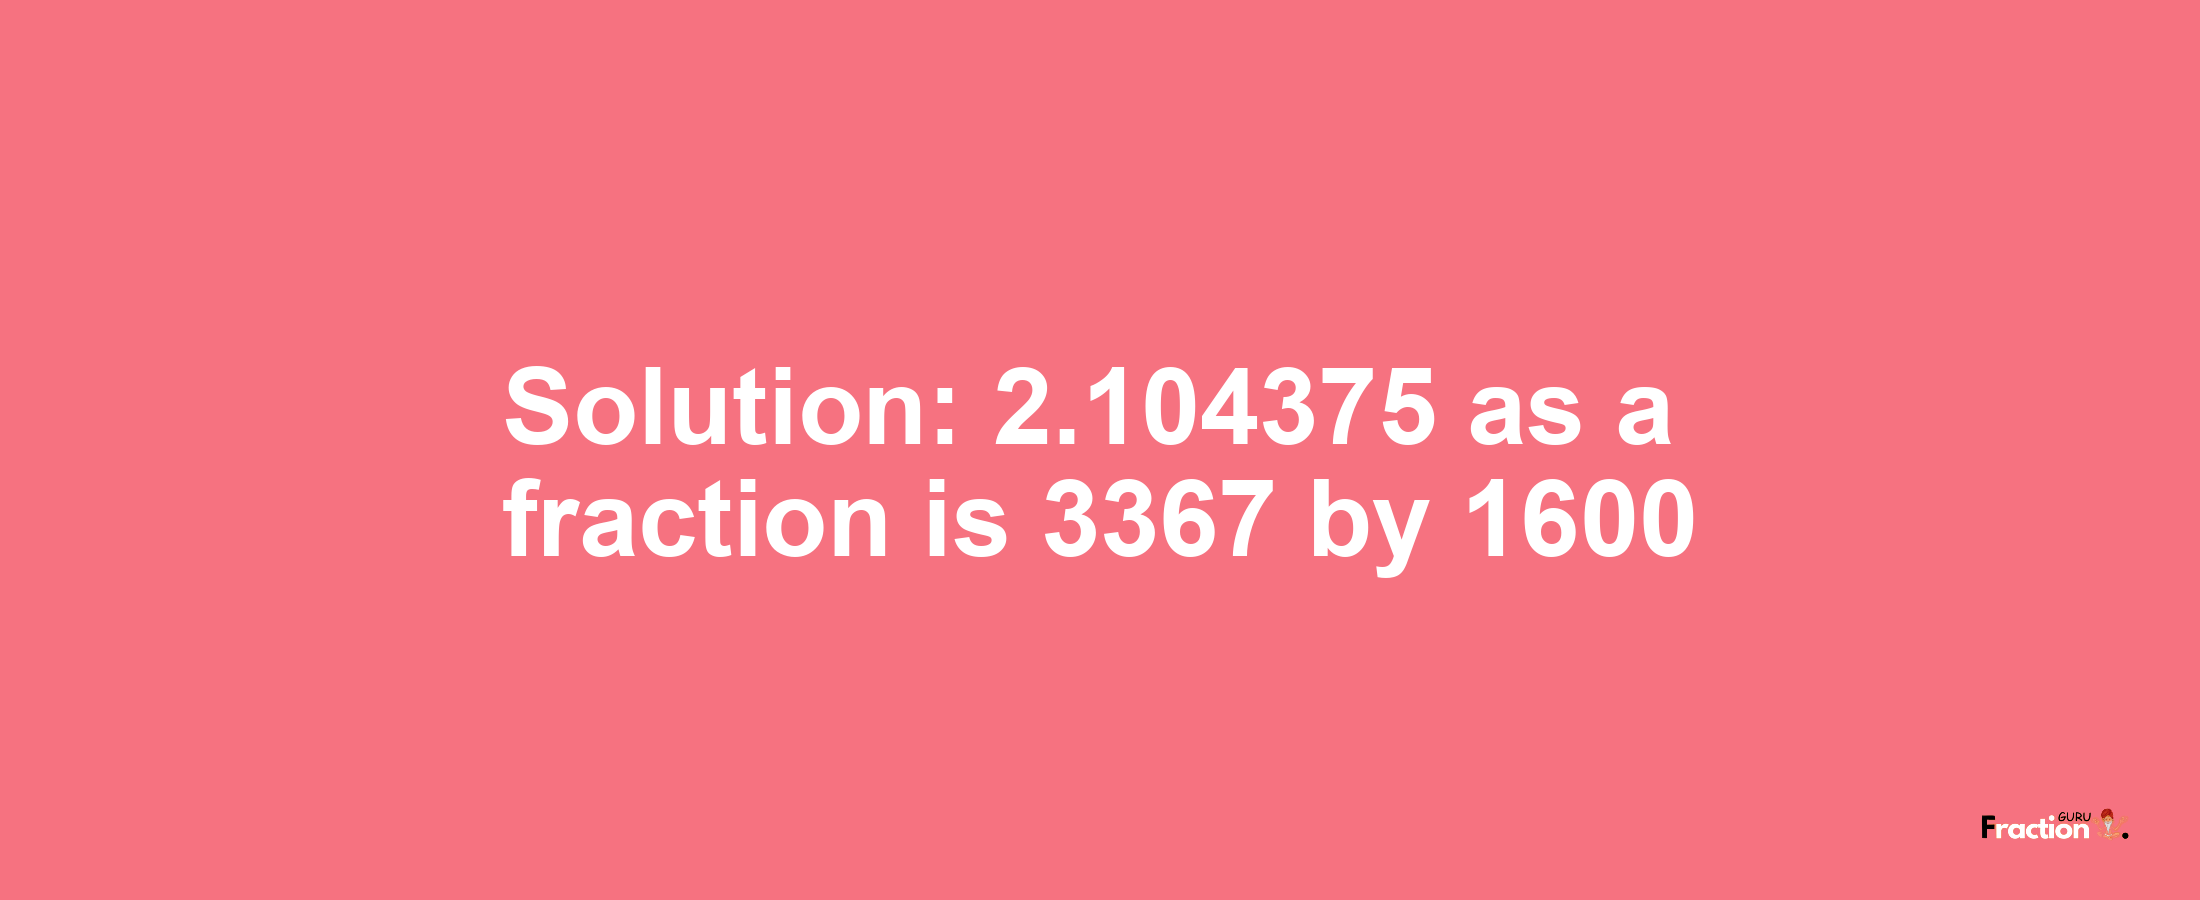 Solution:2.104375 as a fraction is 3367/1600